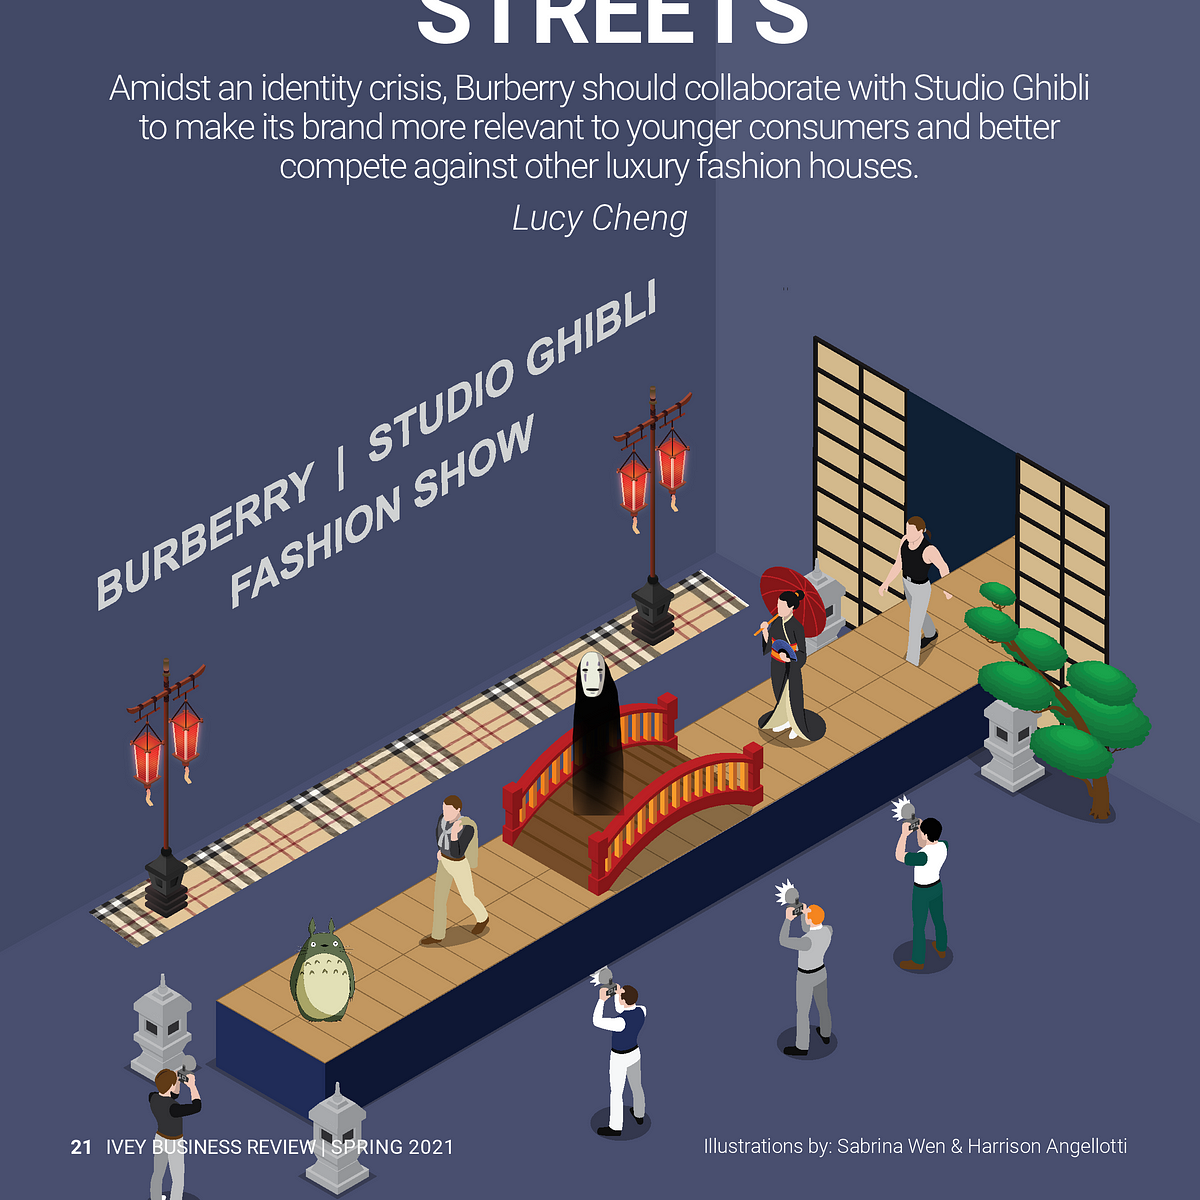 Burberry: Bringing Screens to the Streets | by IBR Editorial Board | Ivey  Business Review | Medium